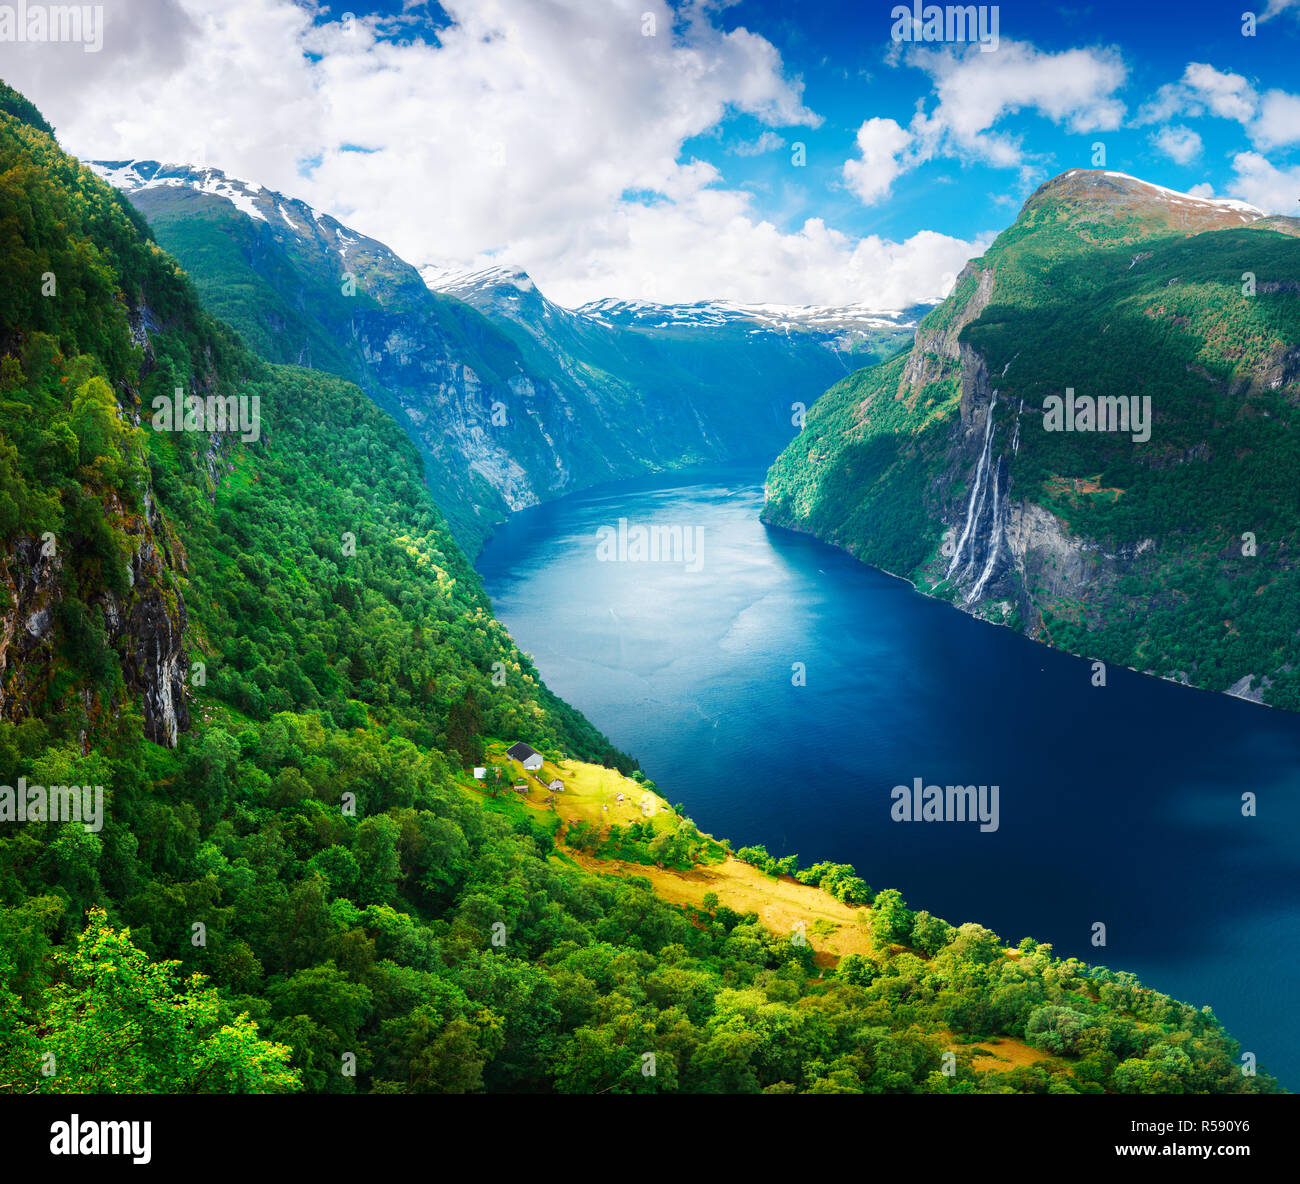 Breathtaking view of Sunnylvsfjorden fjord and famous Seven Sisters waterfalls, near Geiranger village in western Norway. Stock Photo